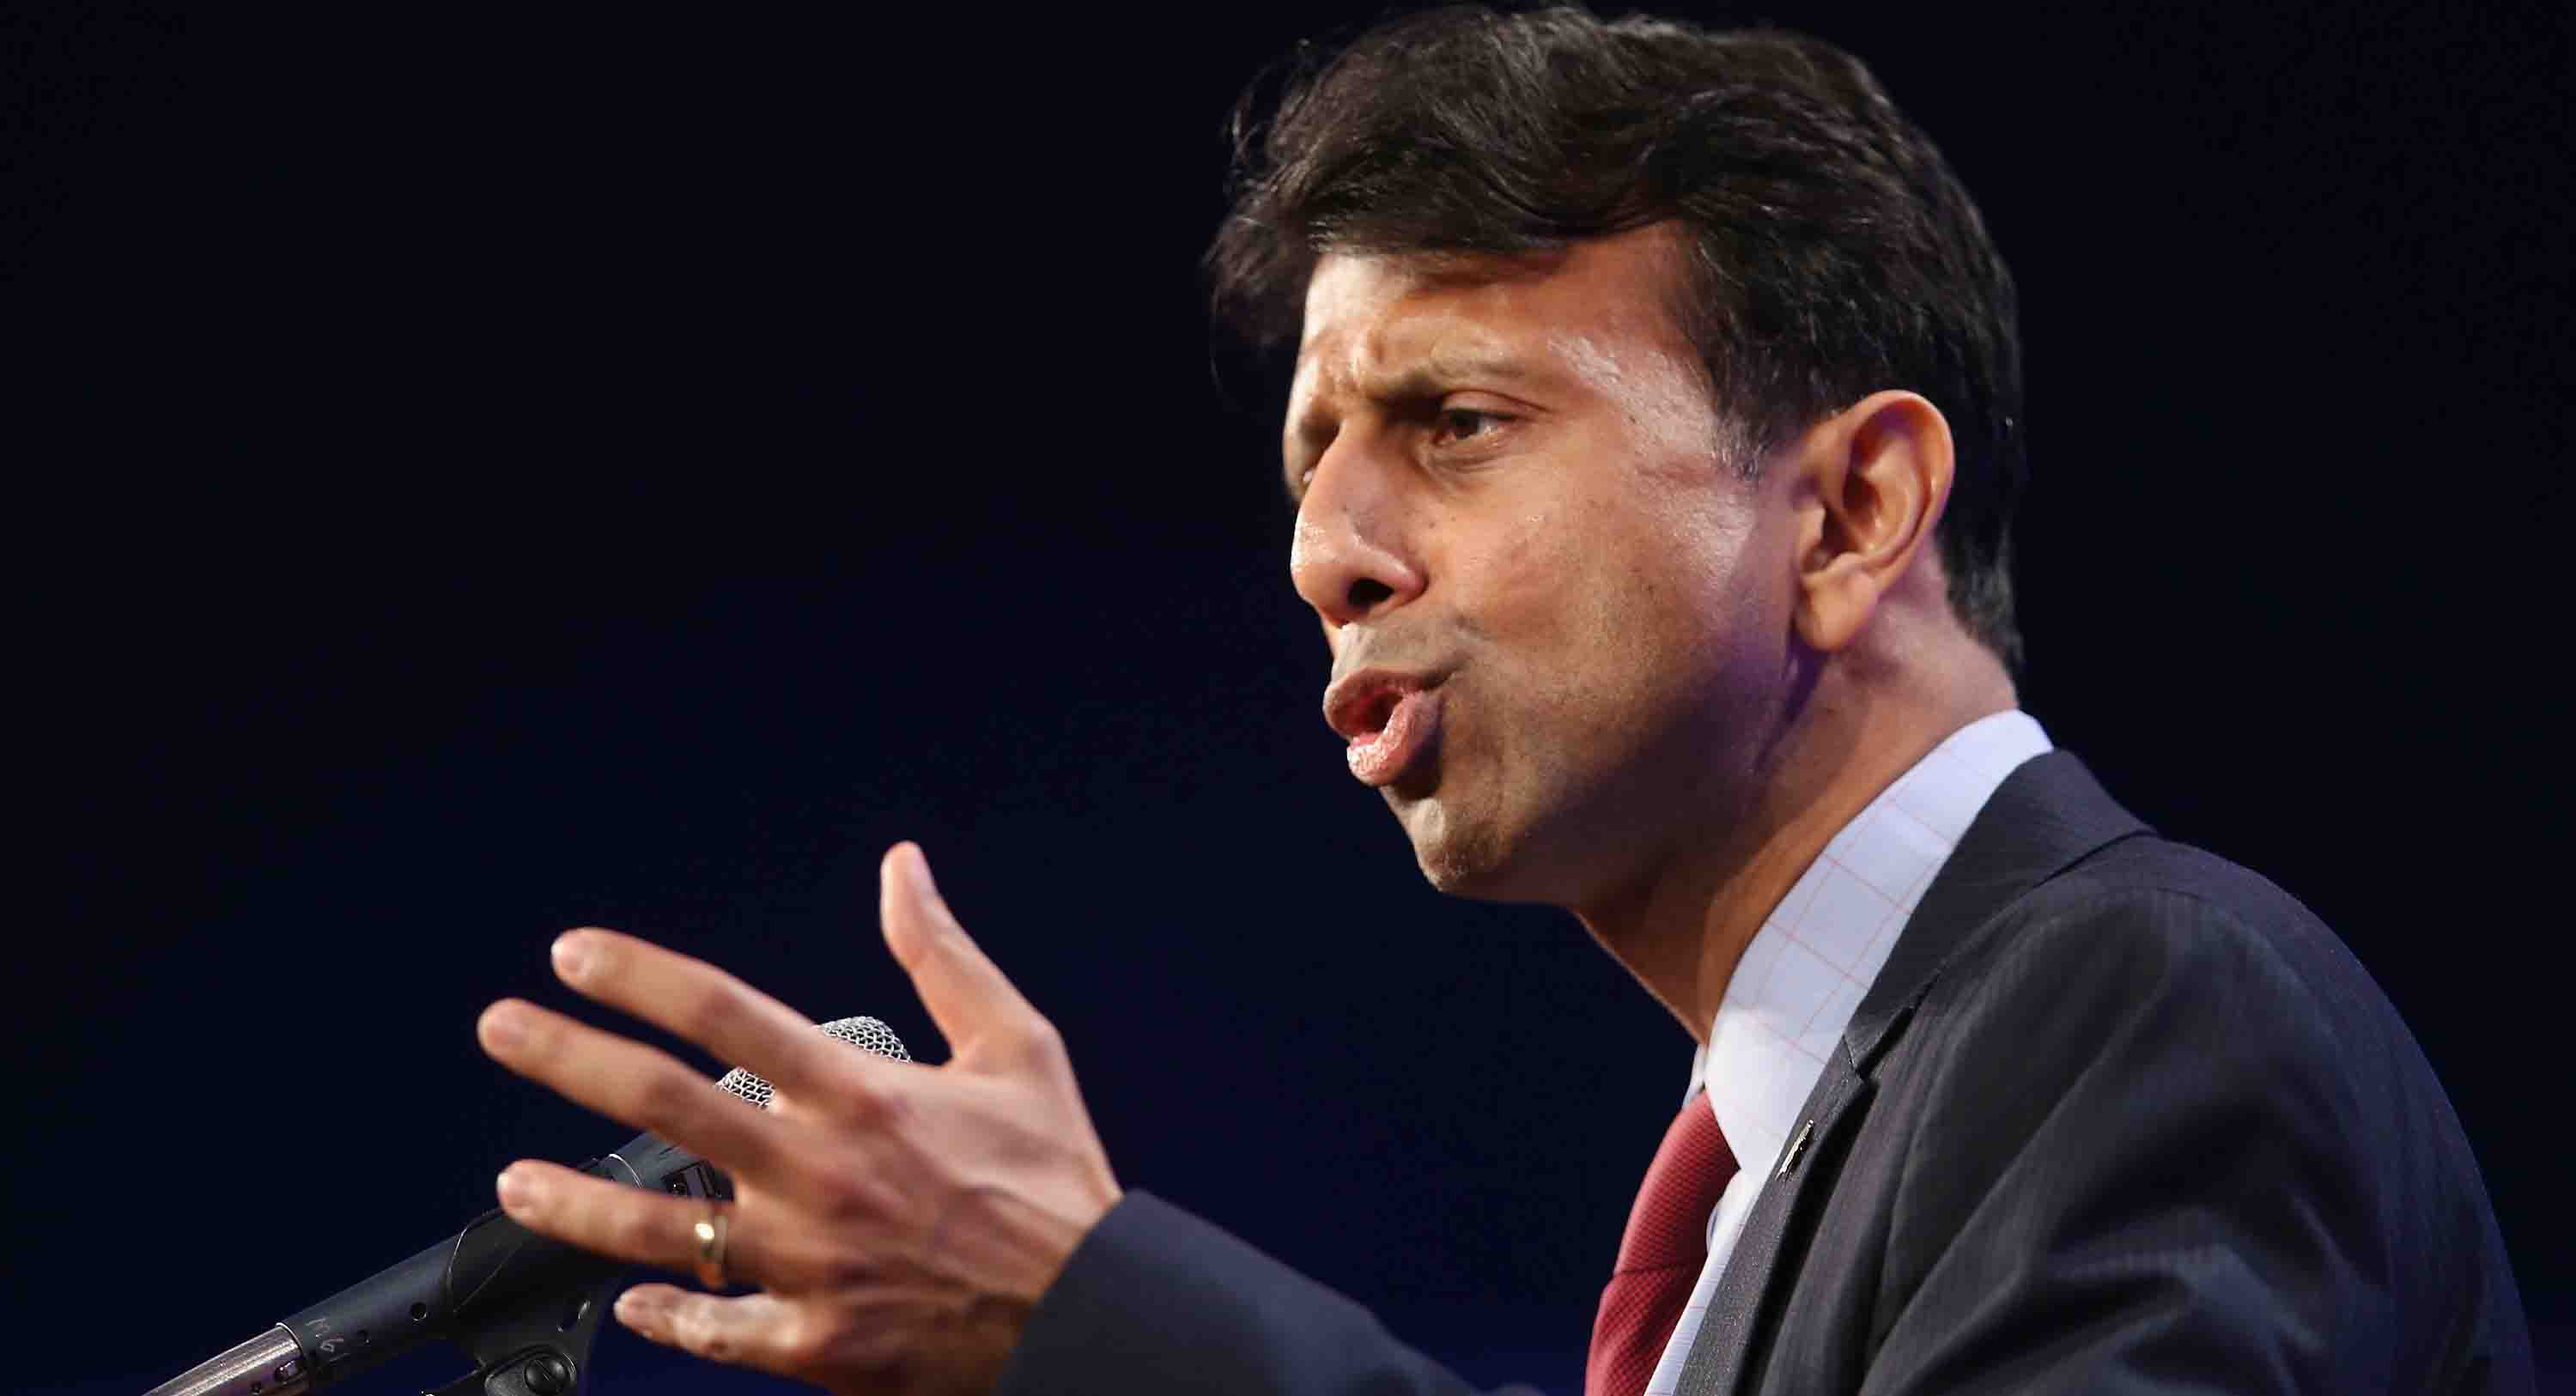 DES MOINES, IA - MAY 16: Louisiana Governor Bobby Jindal speaks to guests gathered for the Republican Party of Iowa's Lincoln Dinner at the Iowa Events Center on May 16, 2015 in Des Moines, Iowa. The event sponsored by the Republican Party of Iowa gave several Republican presidential hopefuls an opportunity to strengthen their support among Iowa Republicans ahead of the 2016 Iowa caucus. (Photo by Scott Olson/Getty Images)